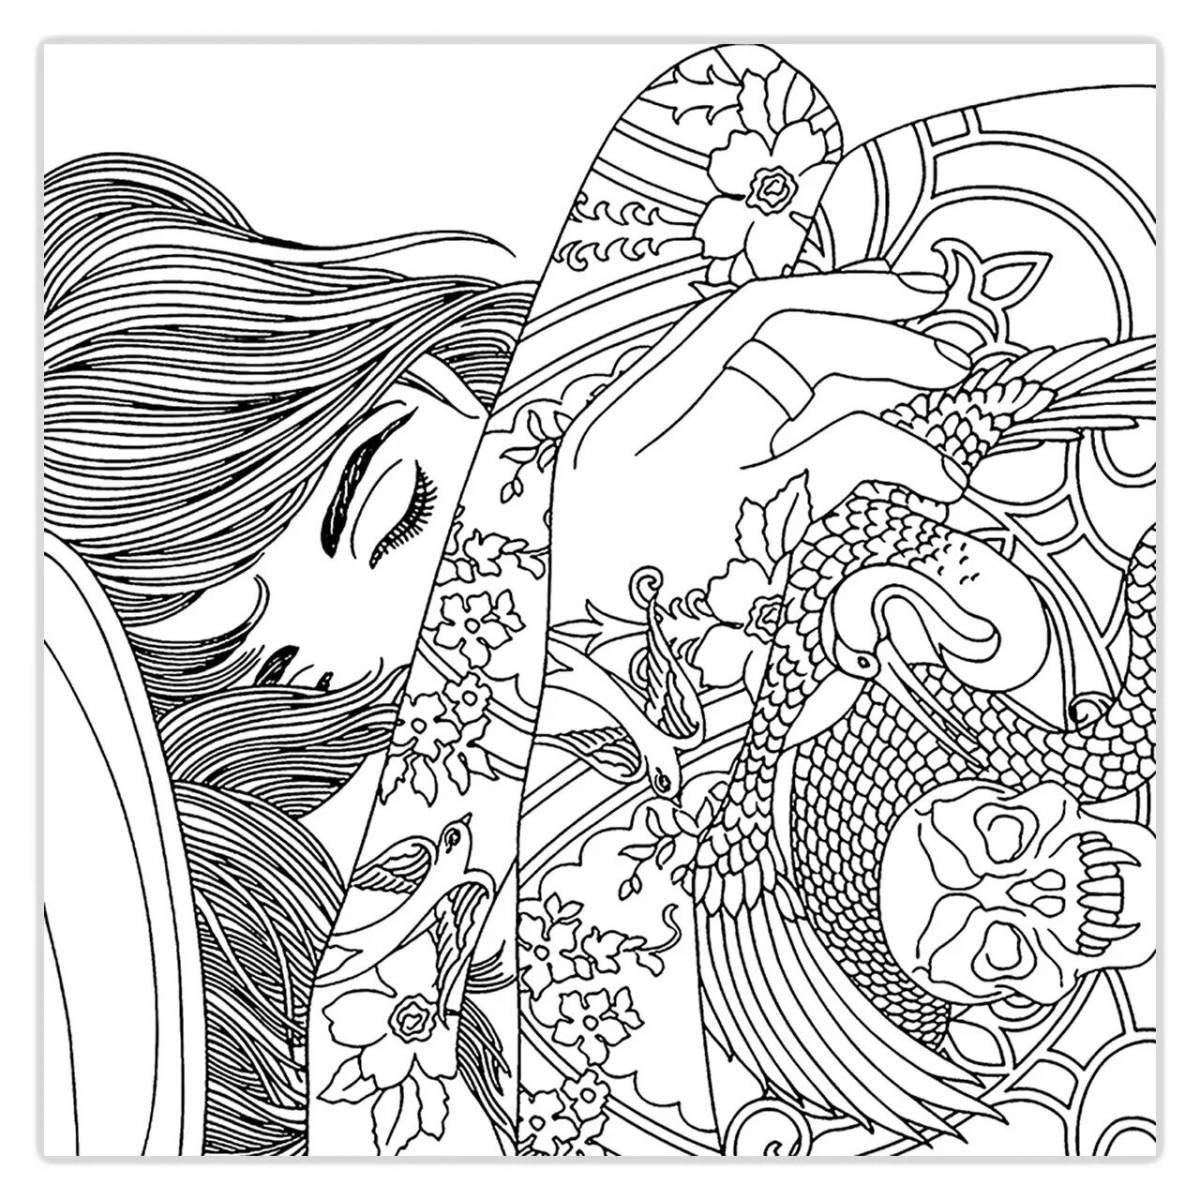 Inspirational coloring book for all adults 18